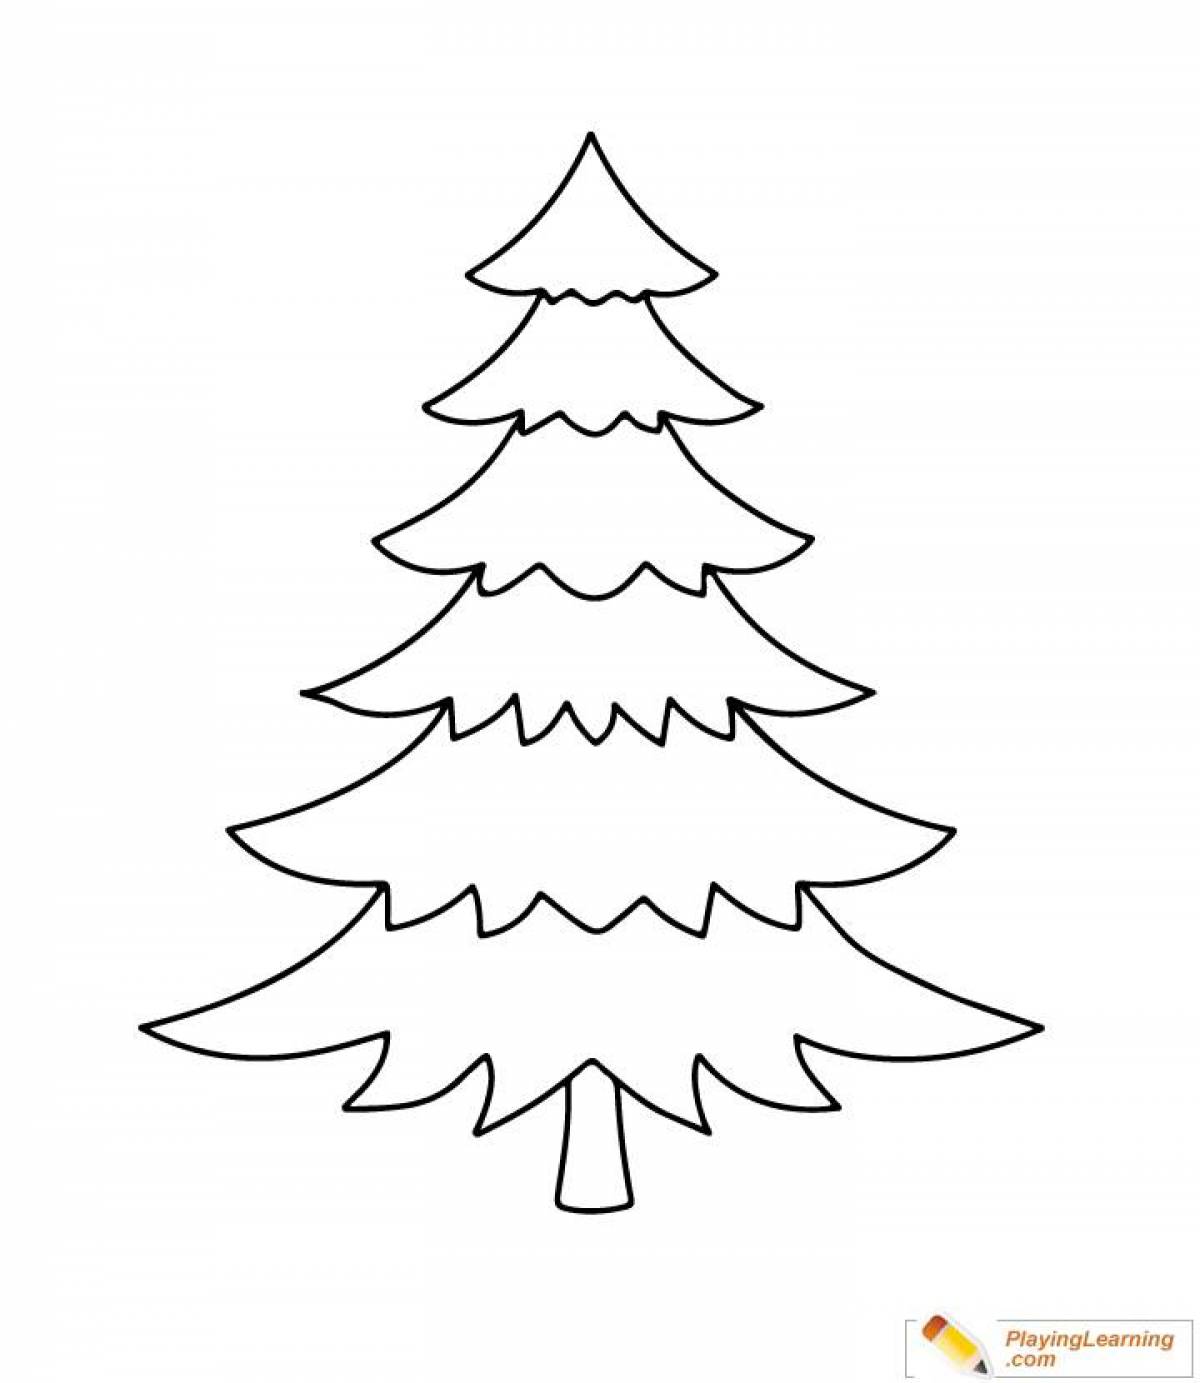 Majestic Christmas tree coloring book